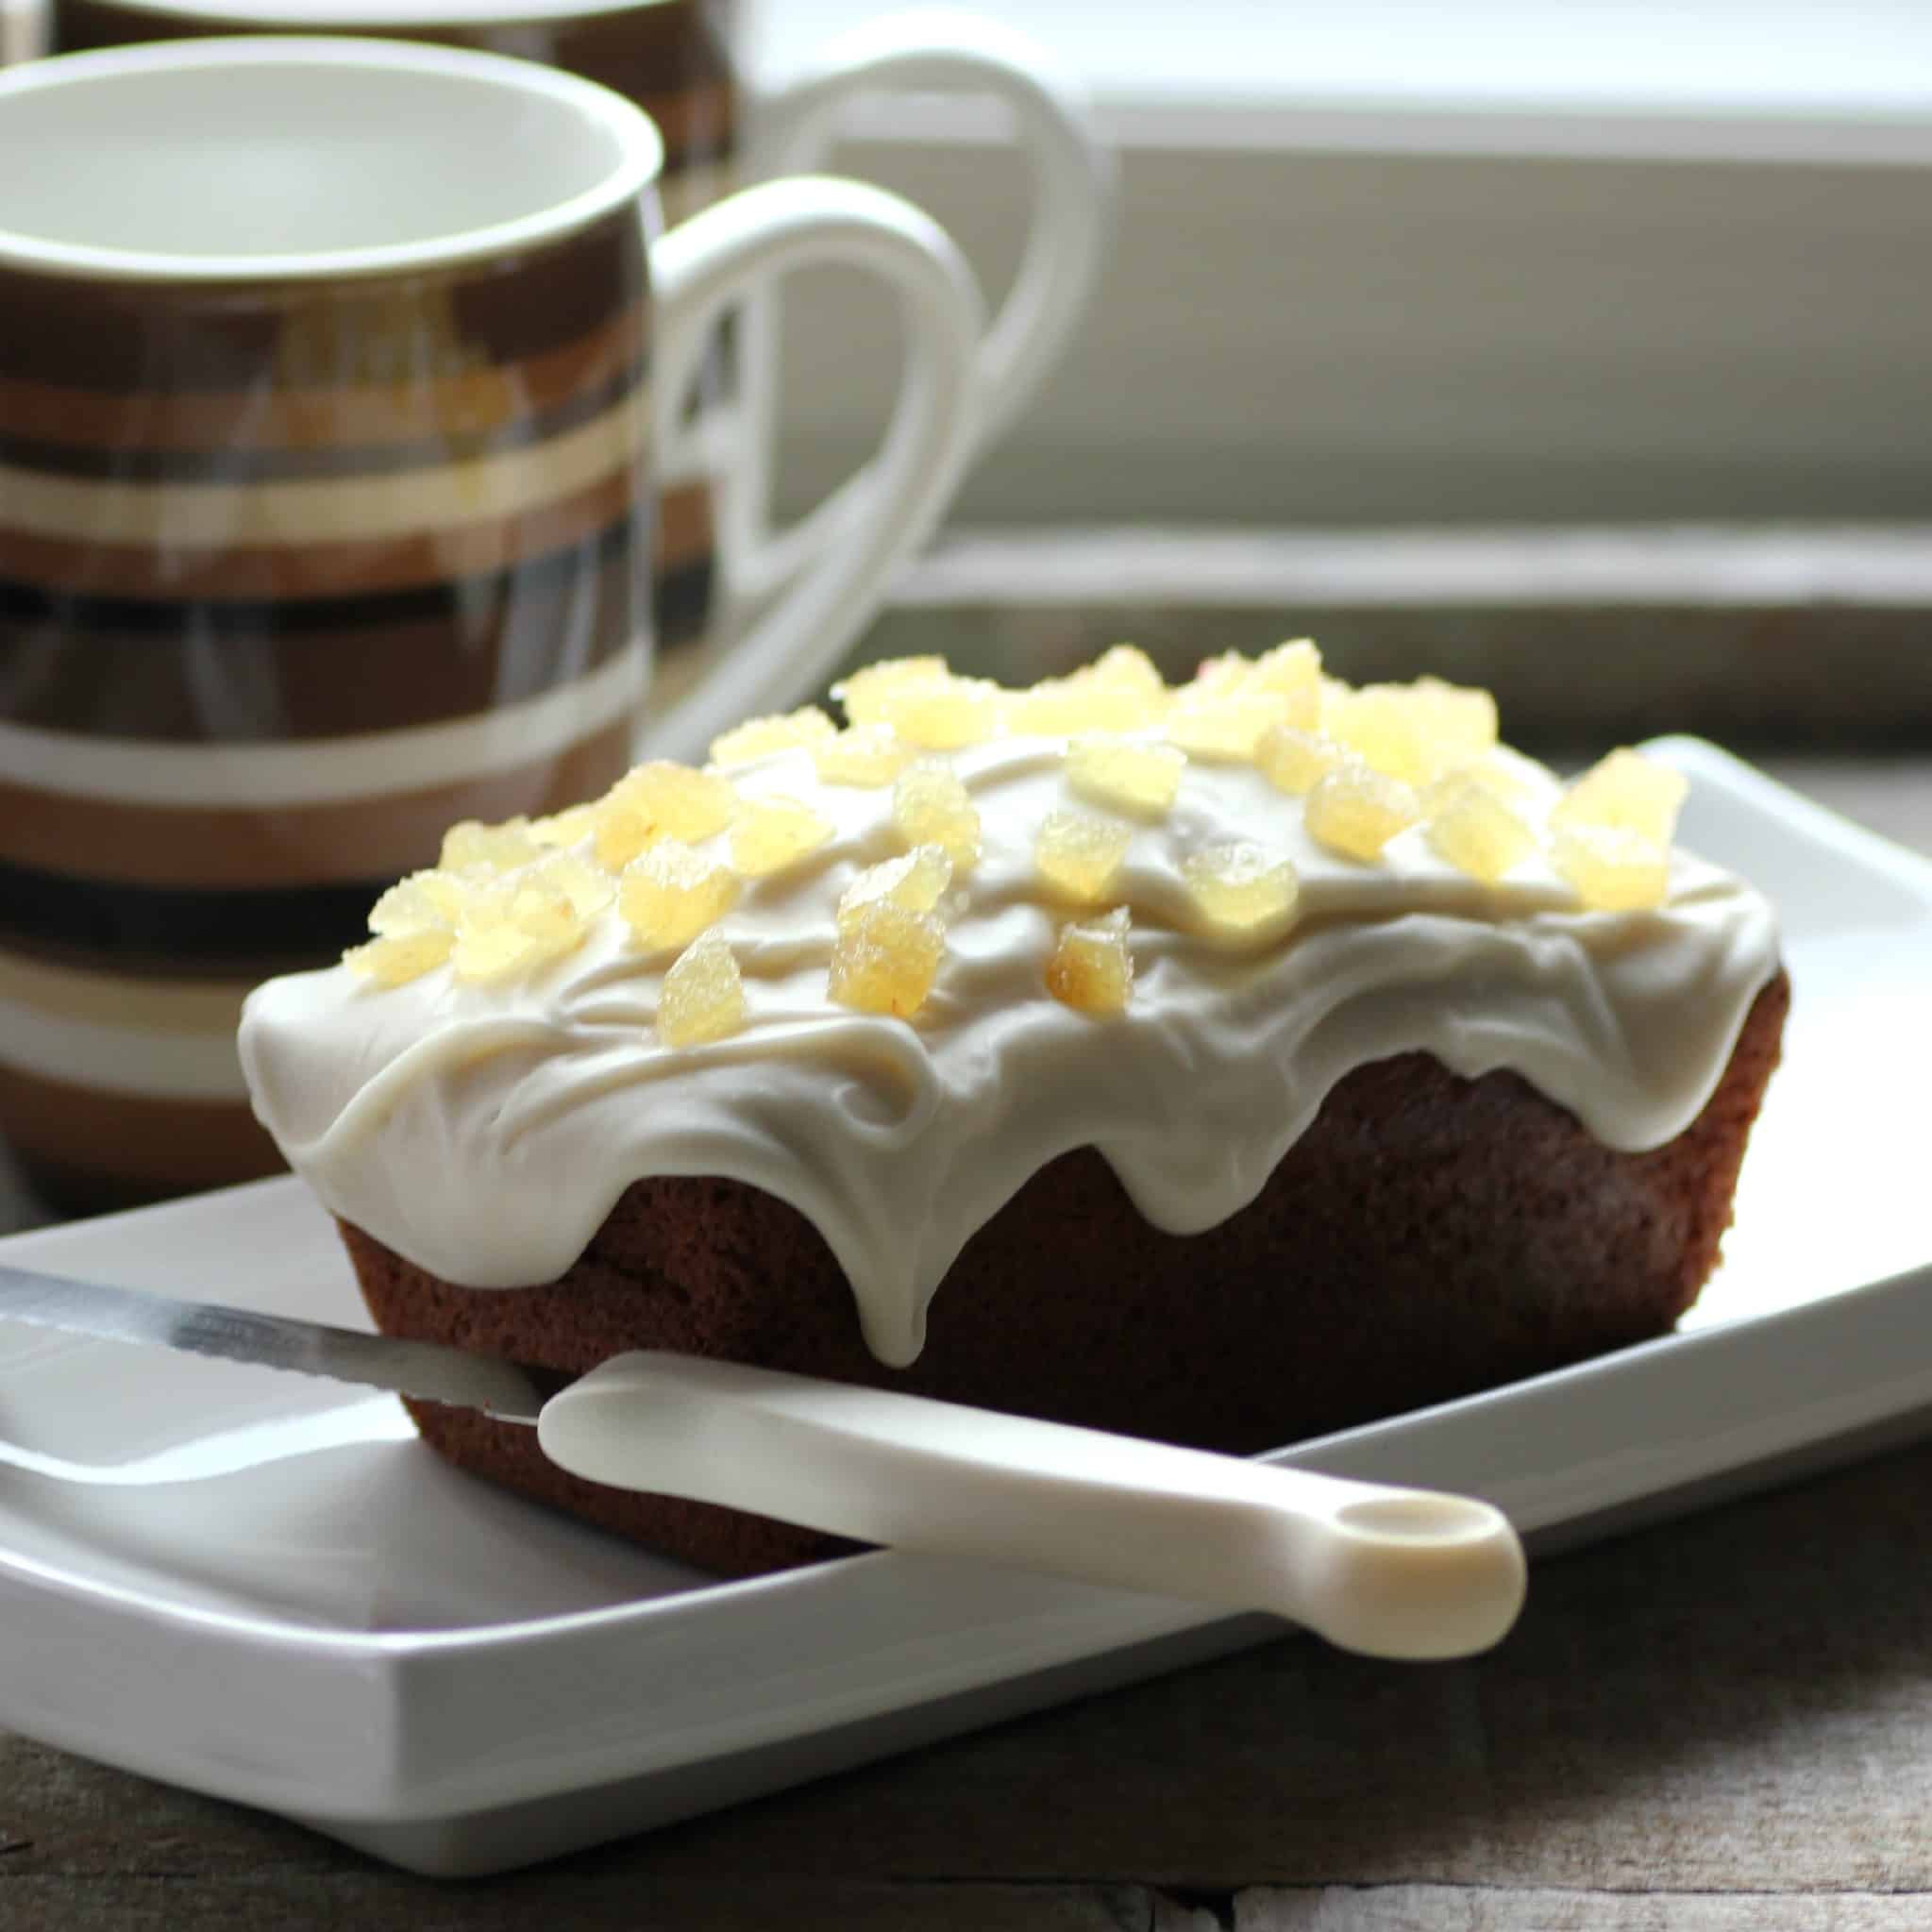 https://noshingwiththenolands.com/wp-content/uploads/2014/12/Copycat-Starbucks-Gingerbread-Loaf-by-Noshing-With-The-Nolands1.jpg